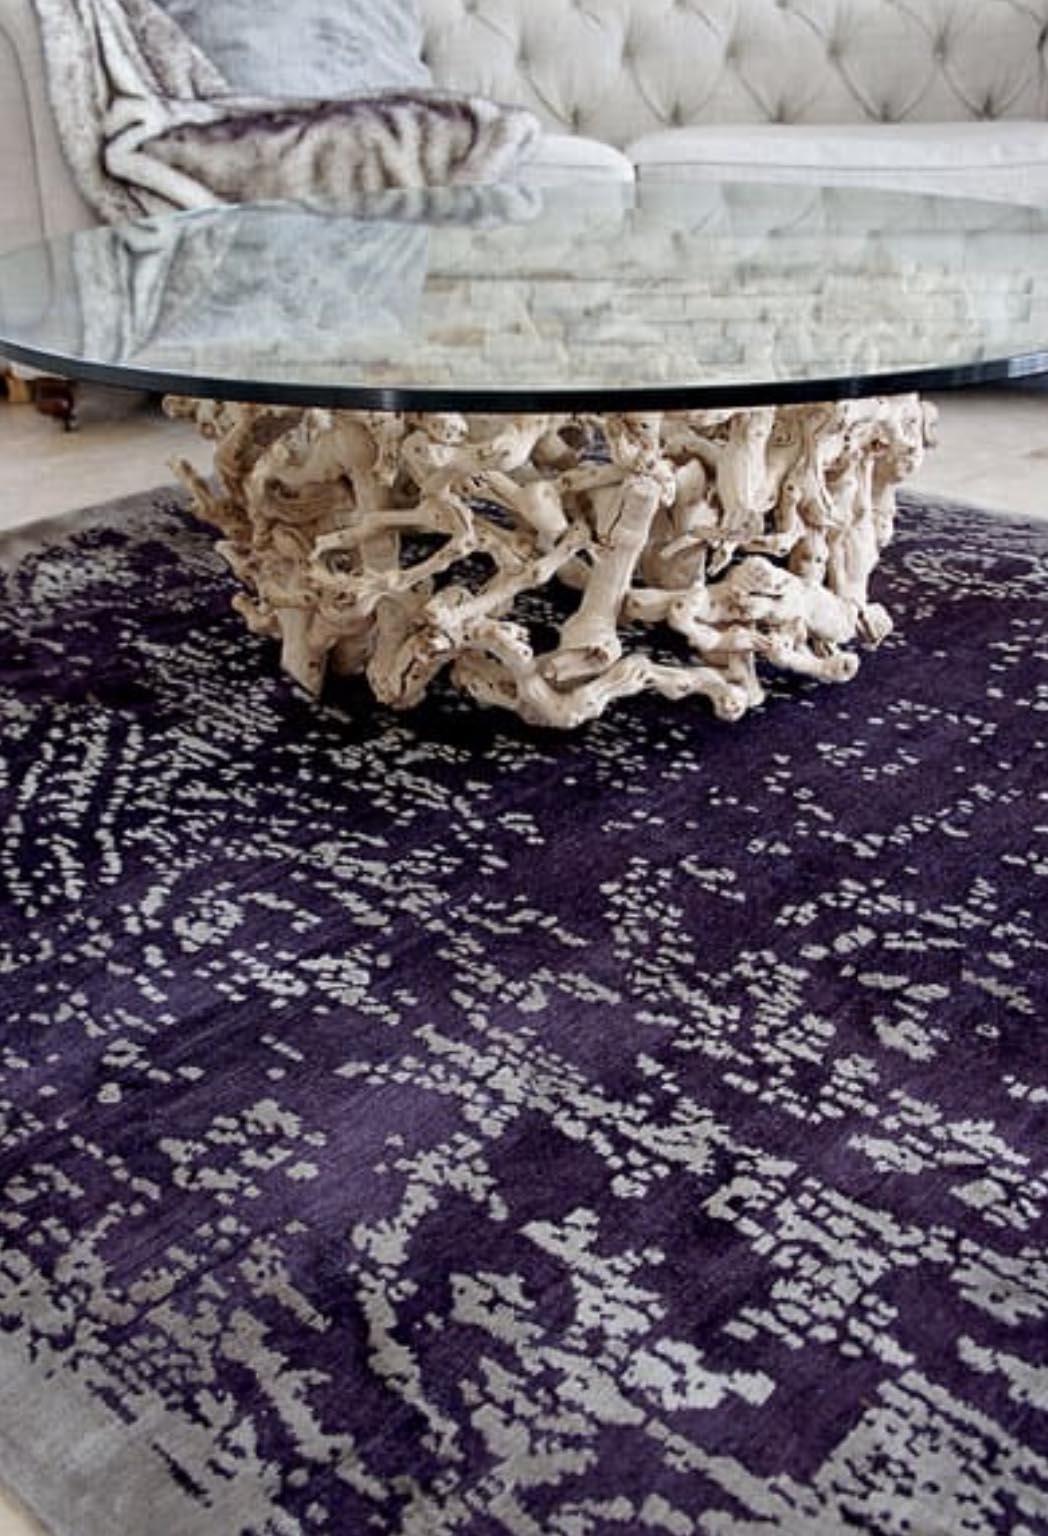 Unmistakably alluring textured rug, the opulent distressed stucco texture in the old city of Sarlat in the south of France, inspired the designer to create this timeless piece. Dreamy soft colors seem to float on the surface effortlessly blend into